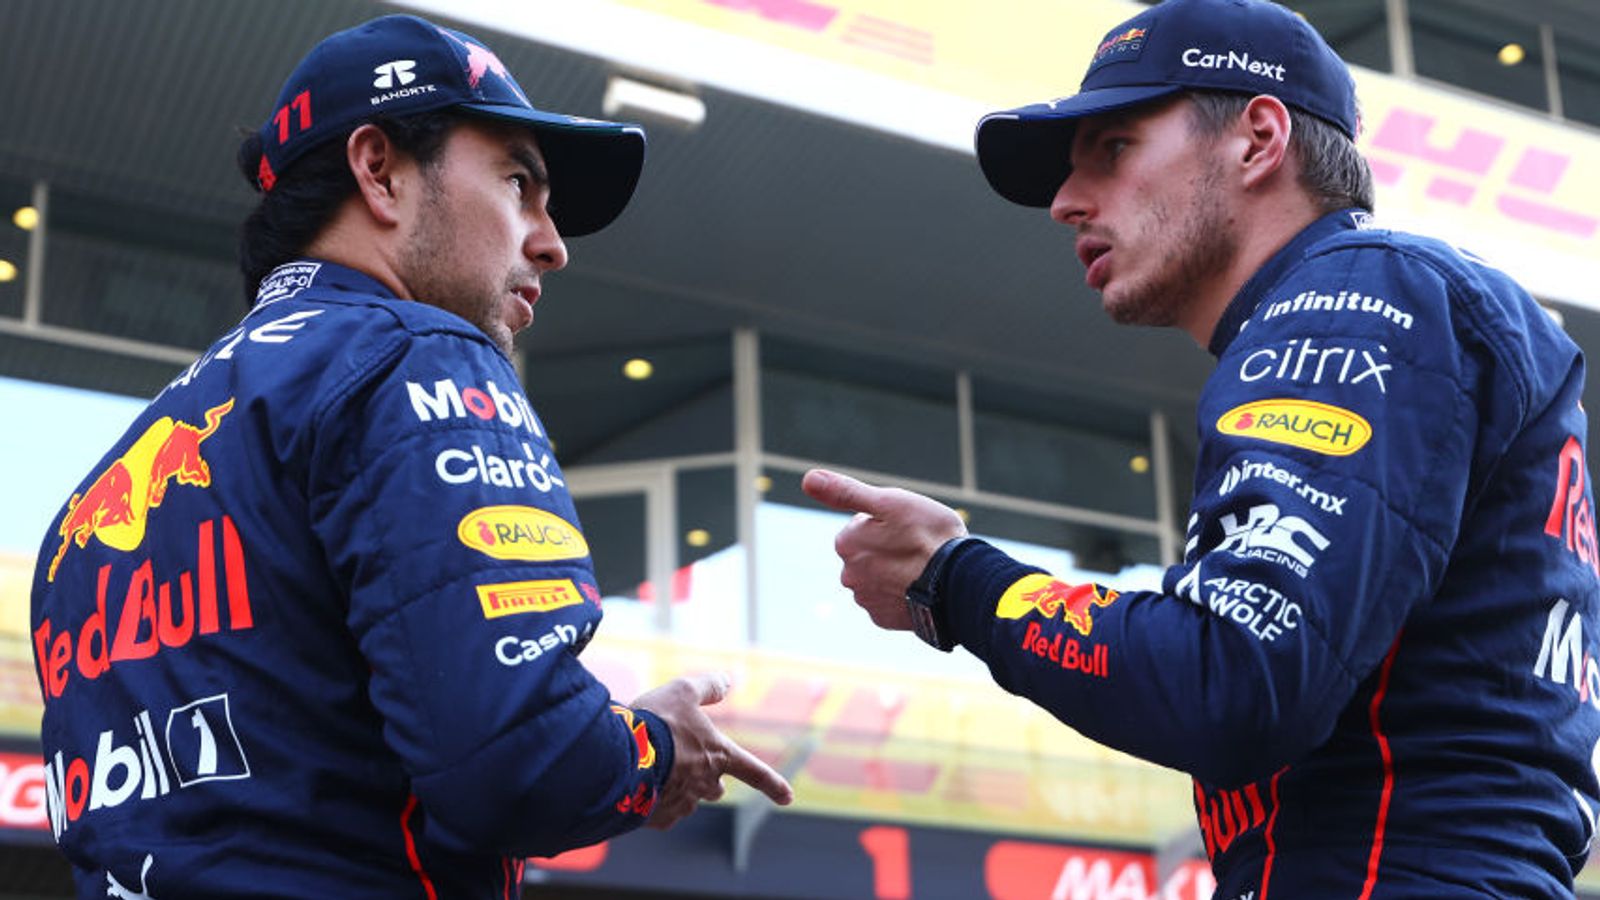 Christian Horner: Max Verstappen- Sergio Perez row caused by team mistake